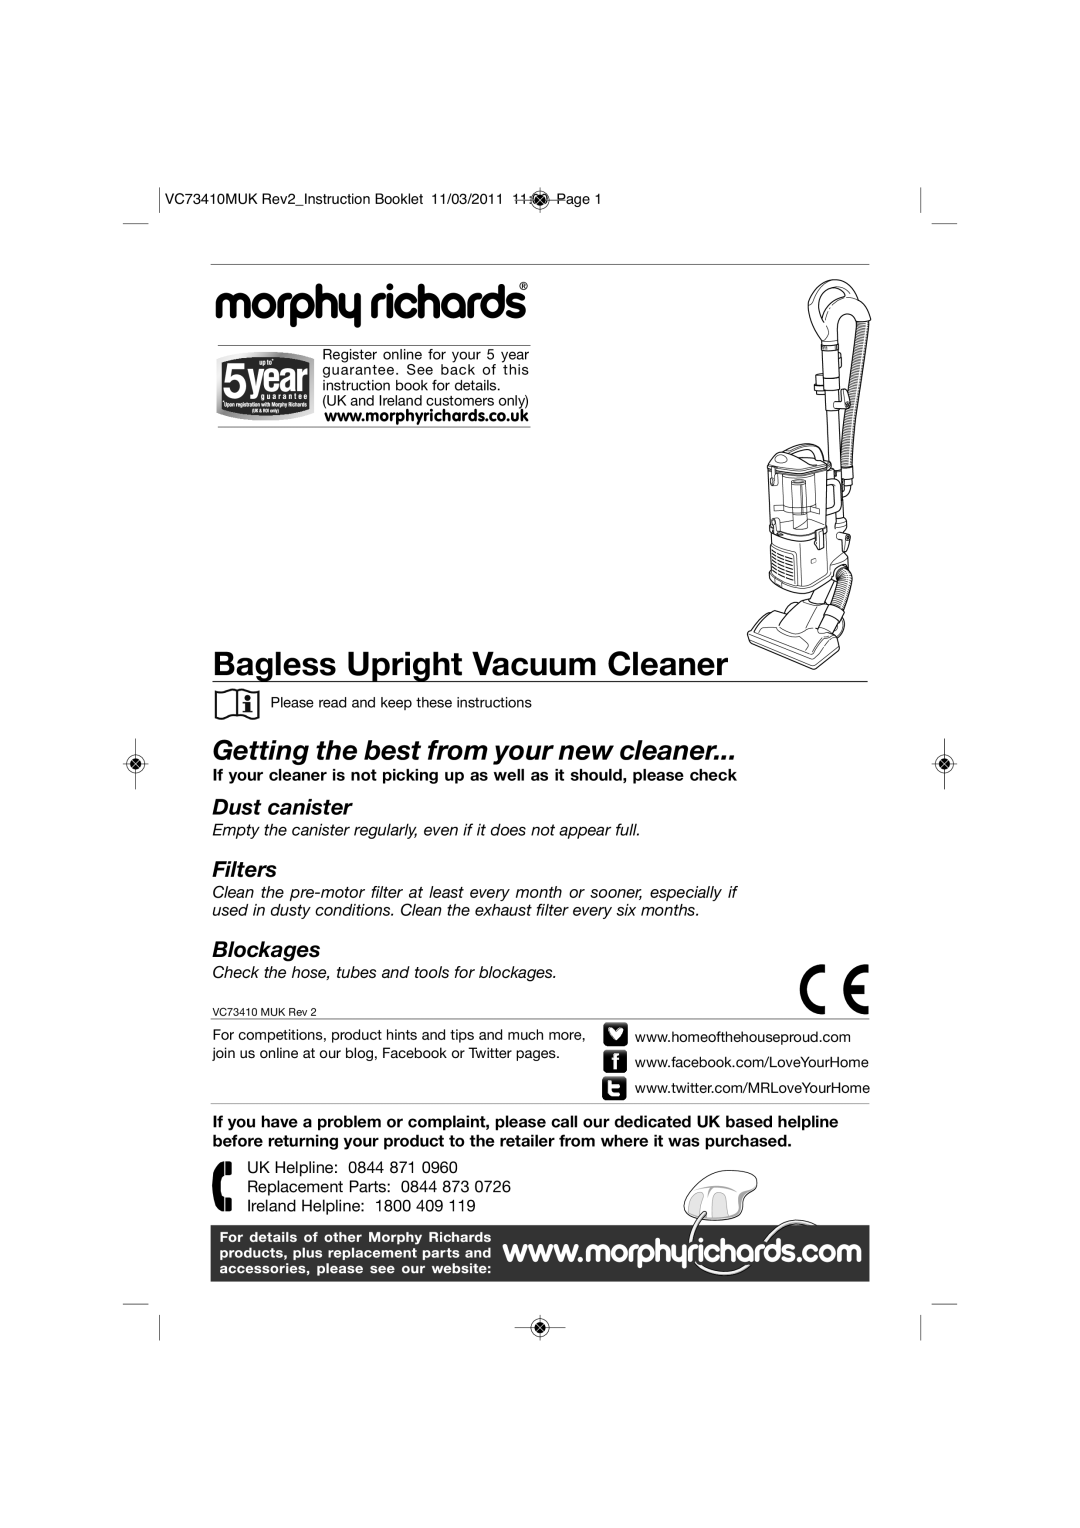 Morphy Richards VC7341DMUK manual Bagless Upright Vacuum Cleaner, Getting the best from your new cleaner, Dust canister 